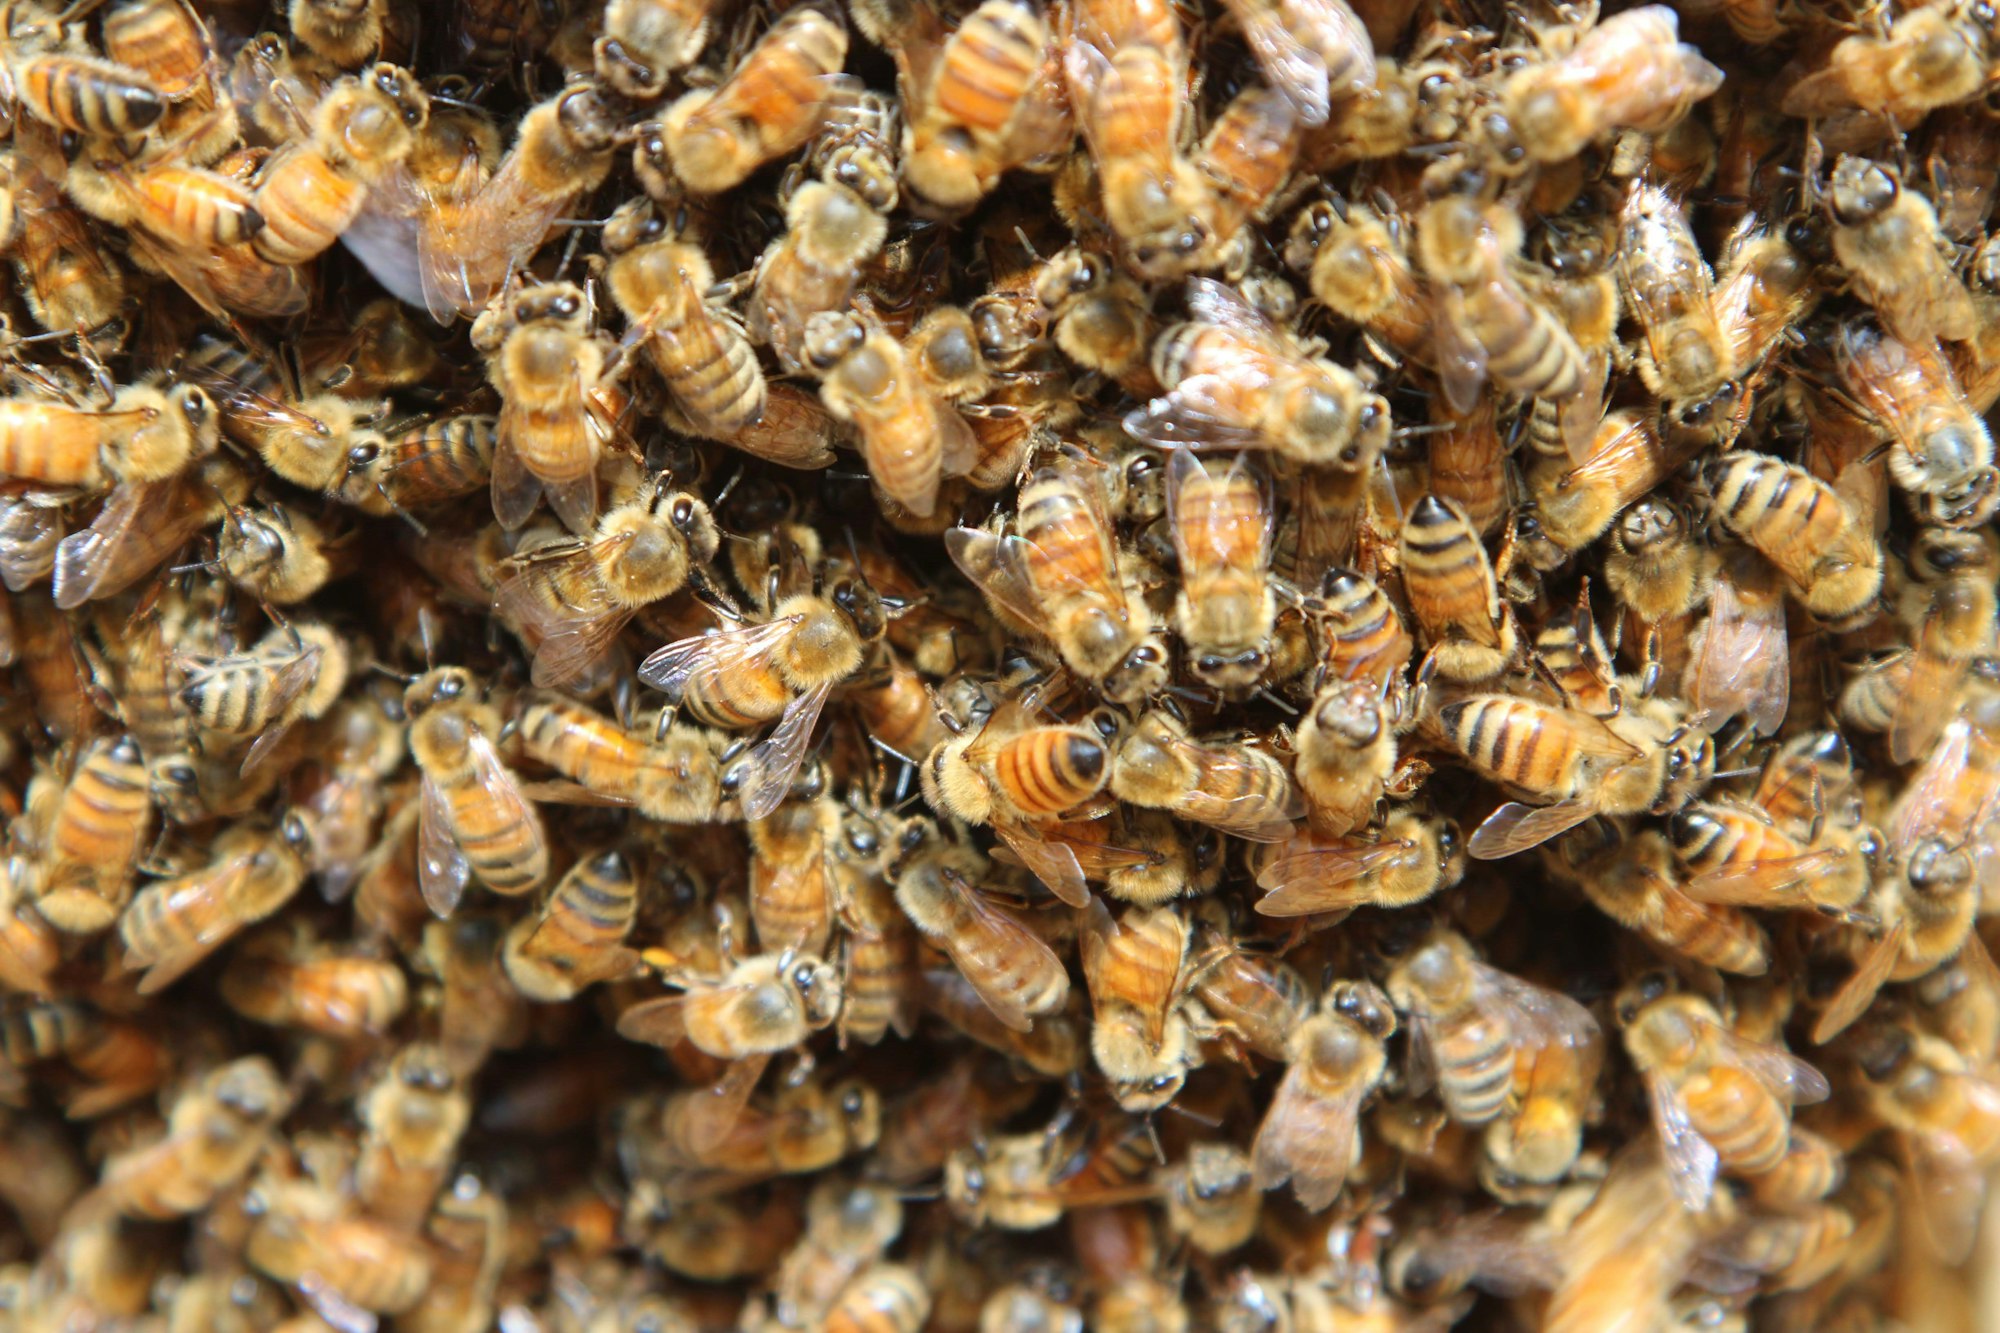 (List #2): Bees, B-Corp and Net Zero May 31, 2021